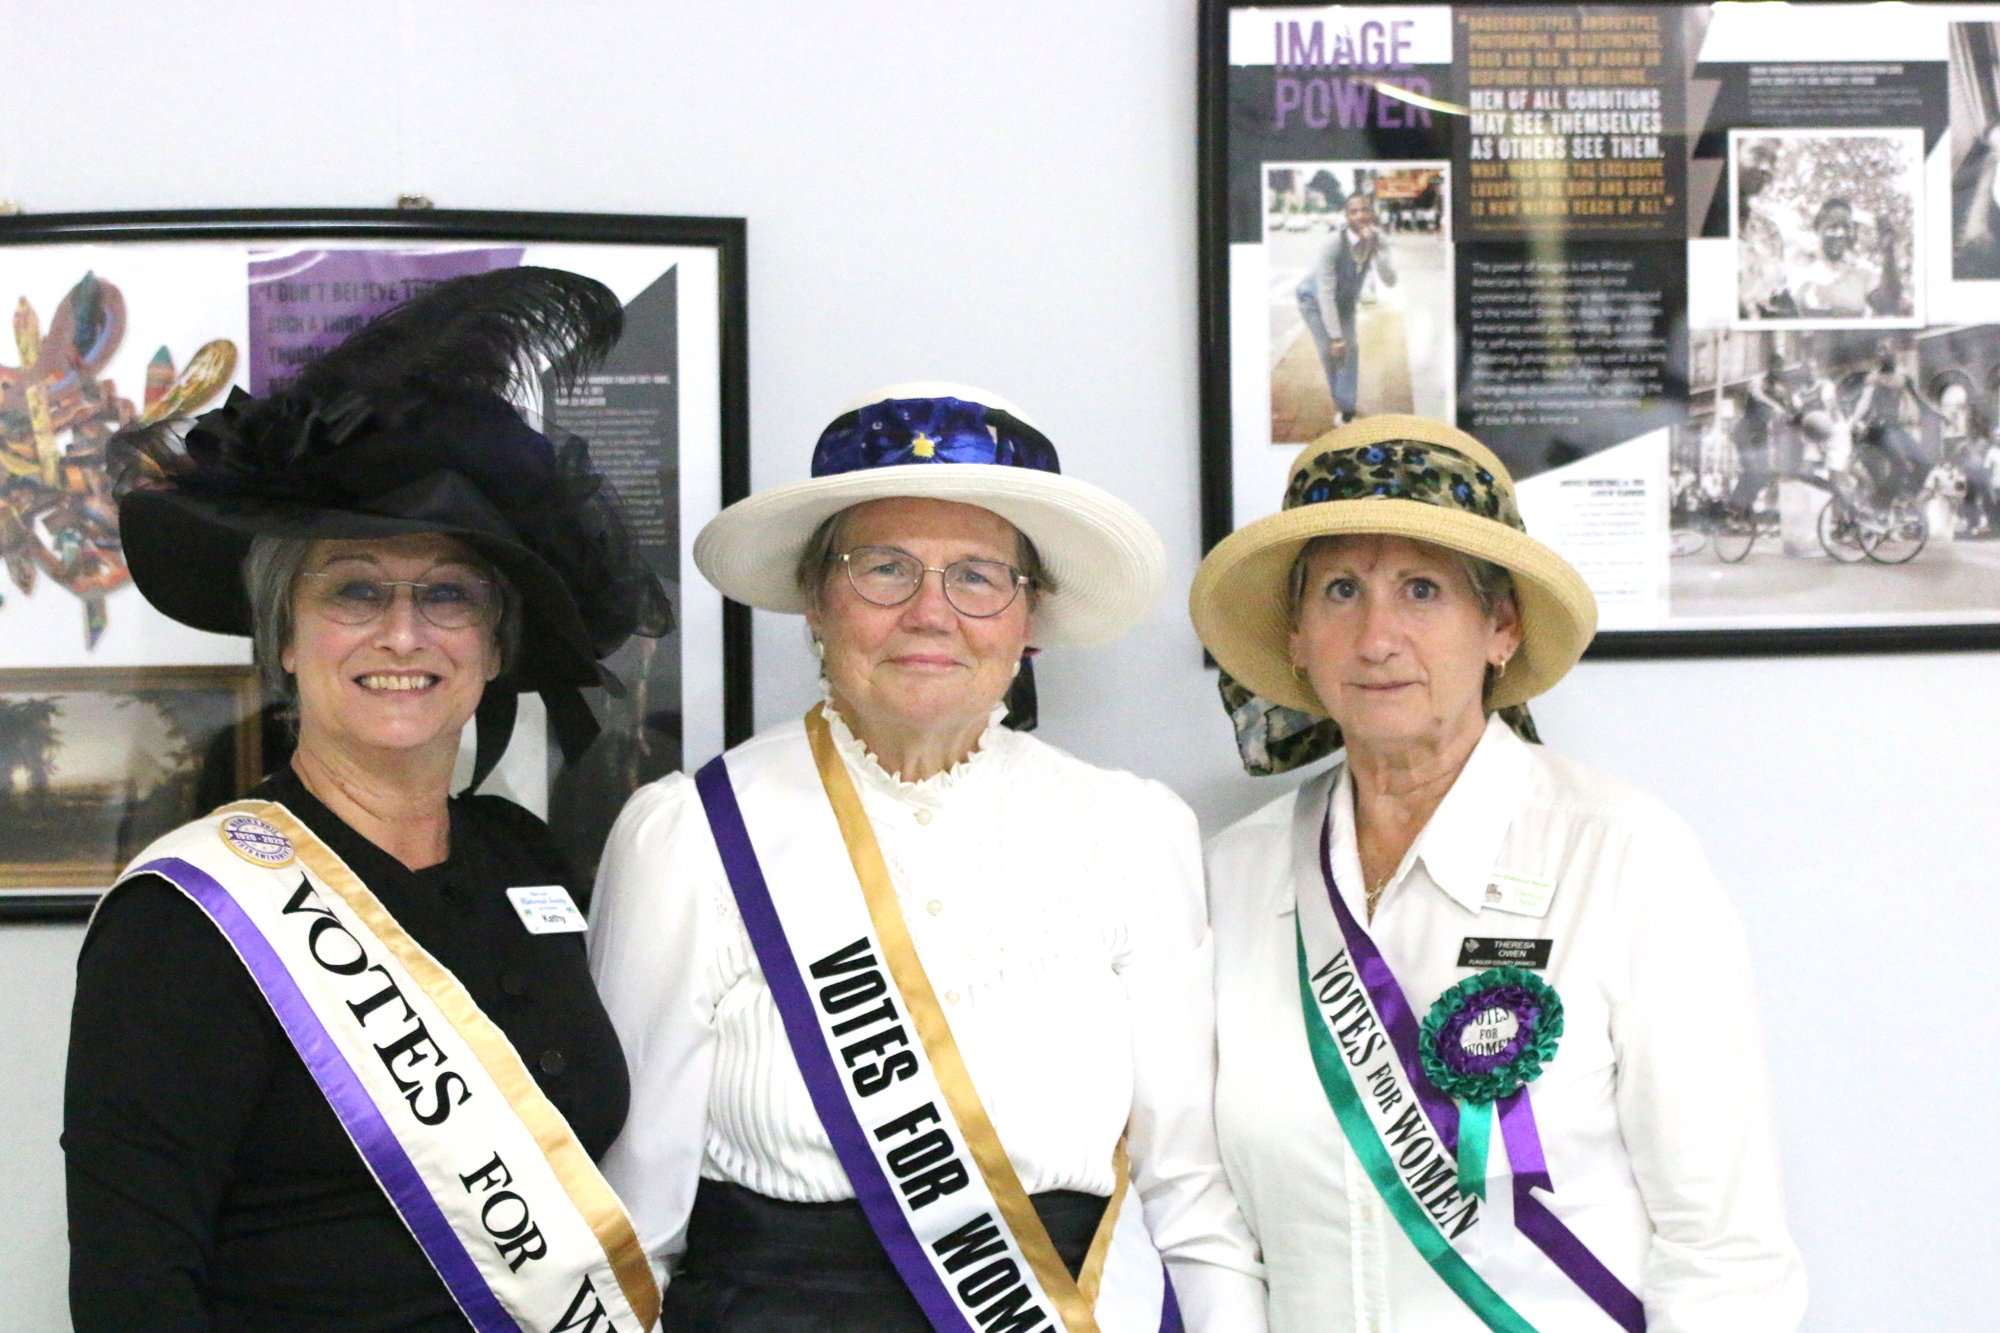 Suffragette re-enactors Kathy Reichard-Ellavsky, Gail Palmer and Theresa Owen. Photo by Brent Woronoff